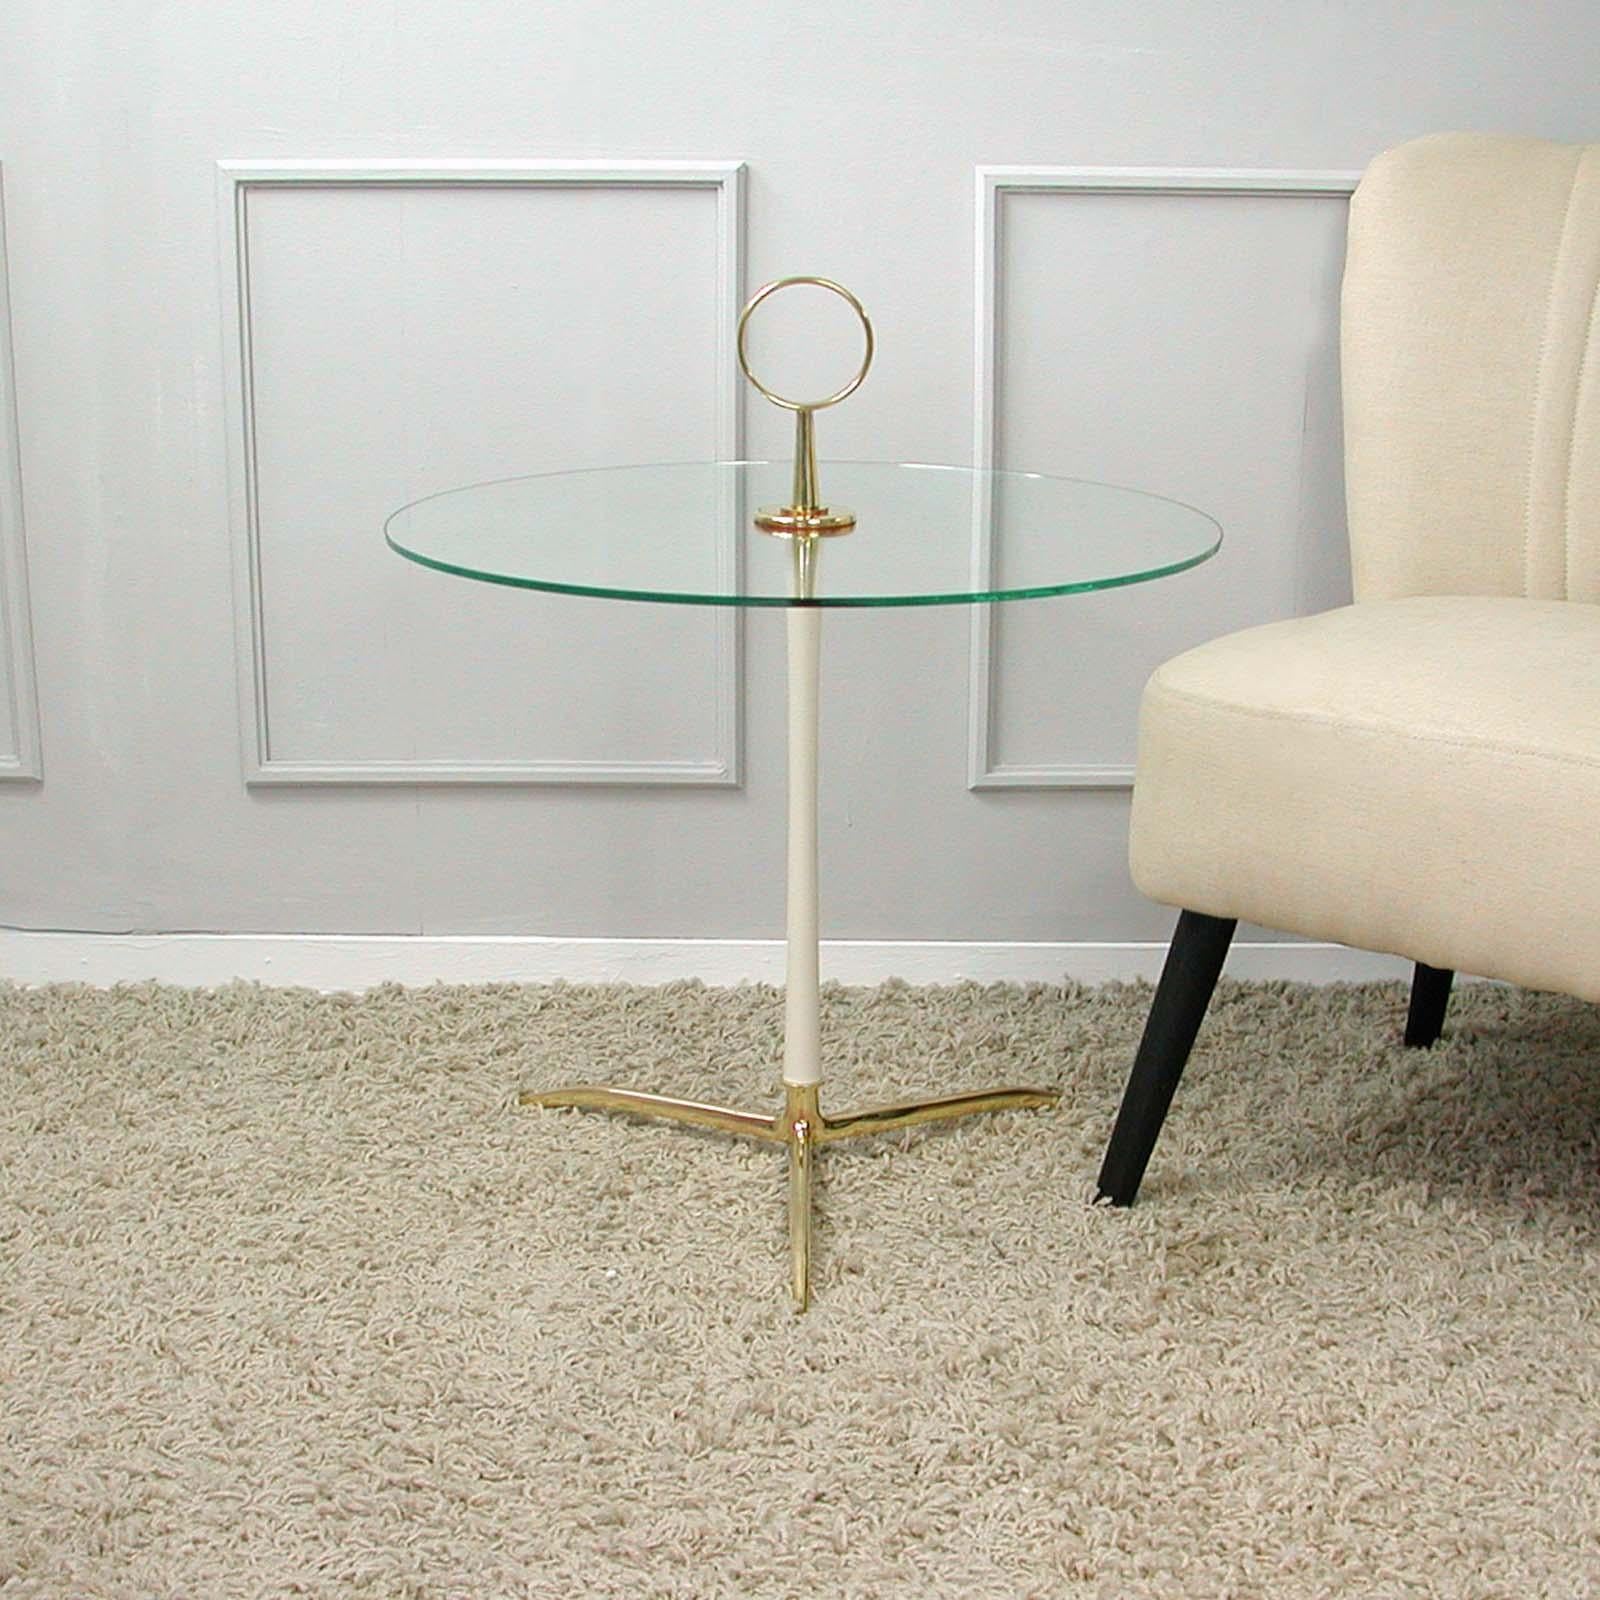 Cesare Lacca Midcentury Brass and Clear Glass Tripod Side Table, Italy, 1950s For Sale 8